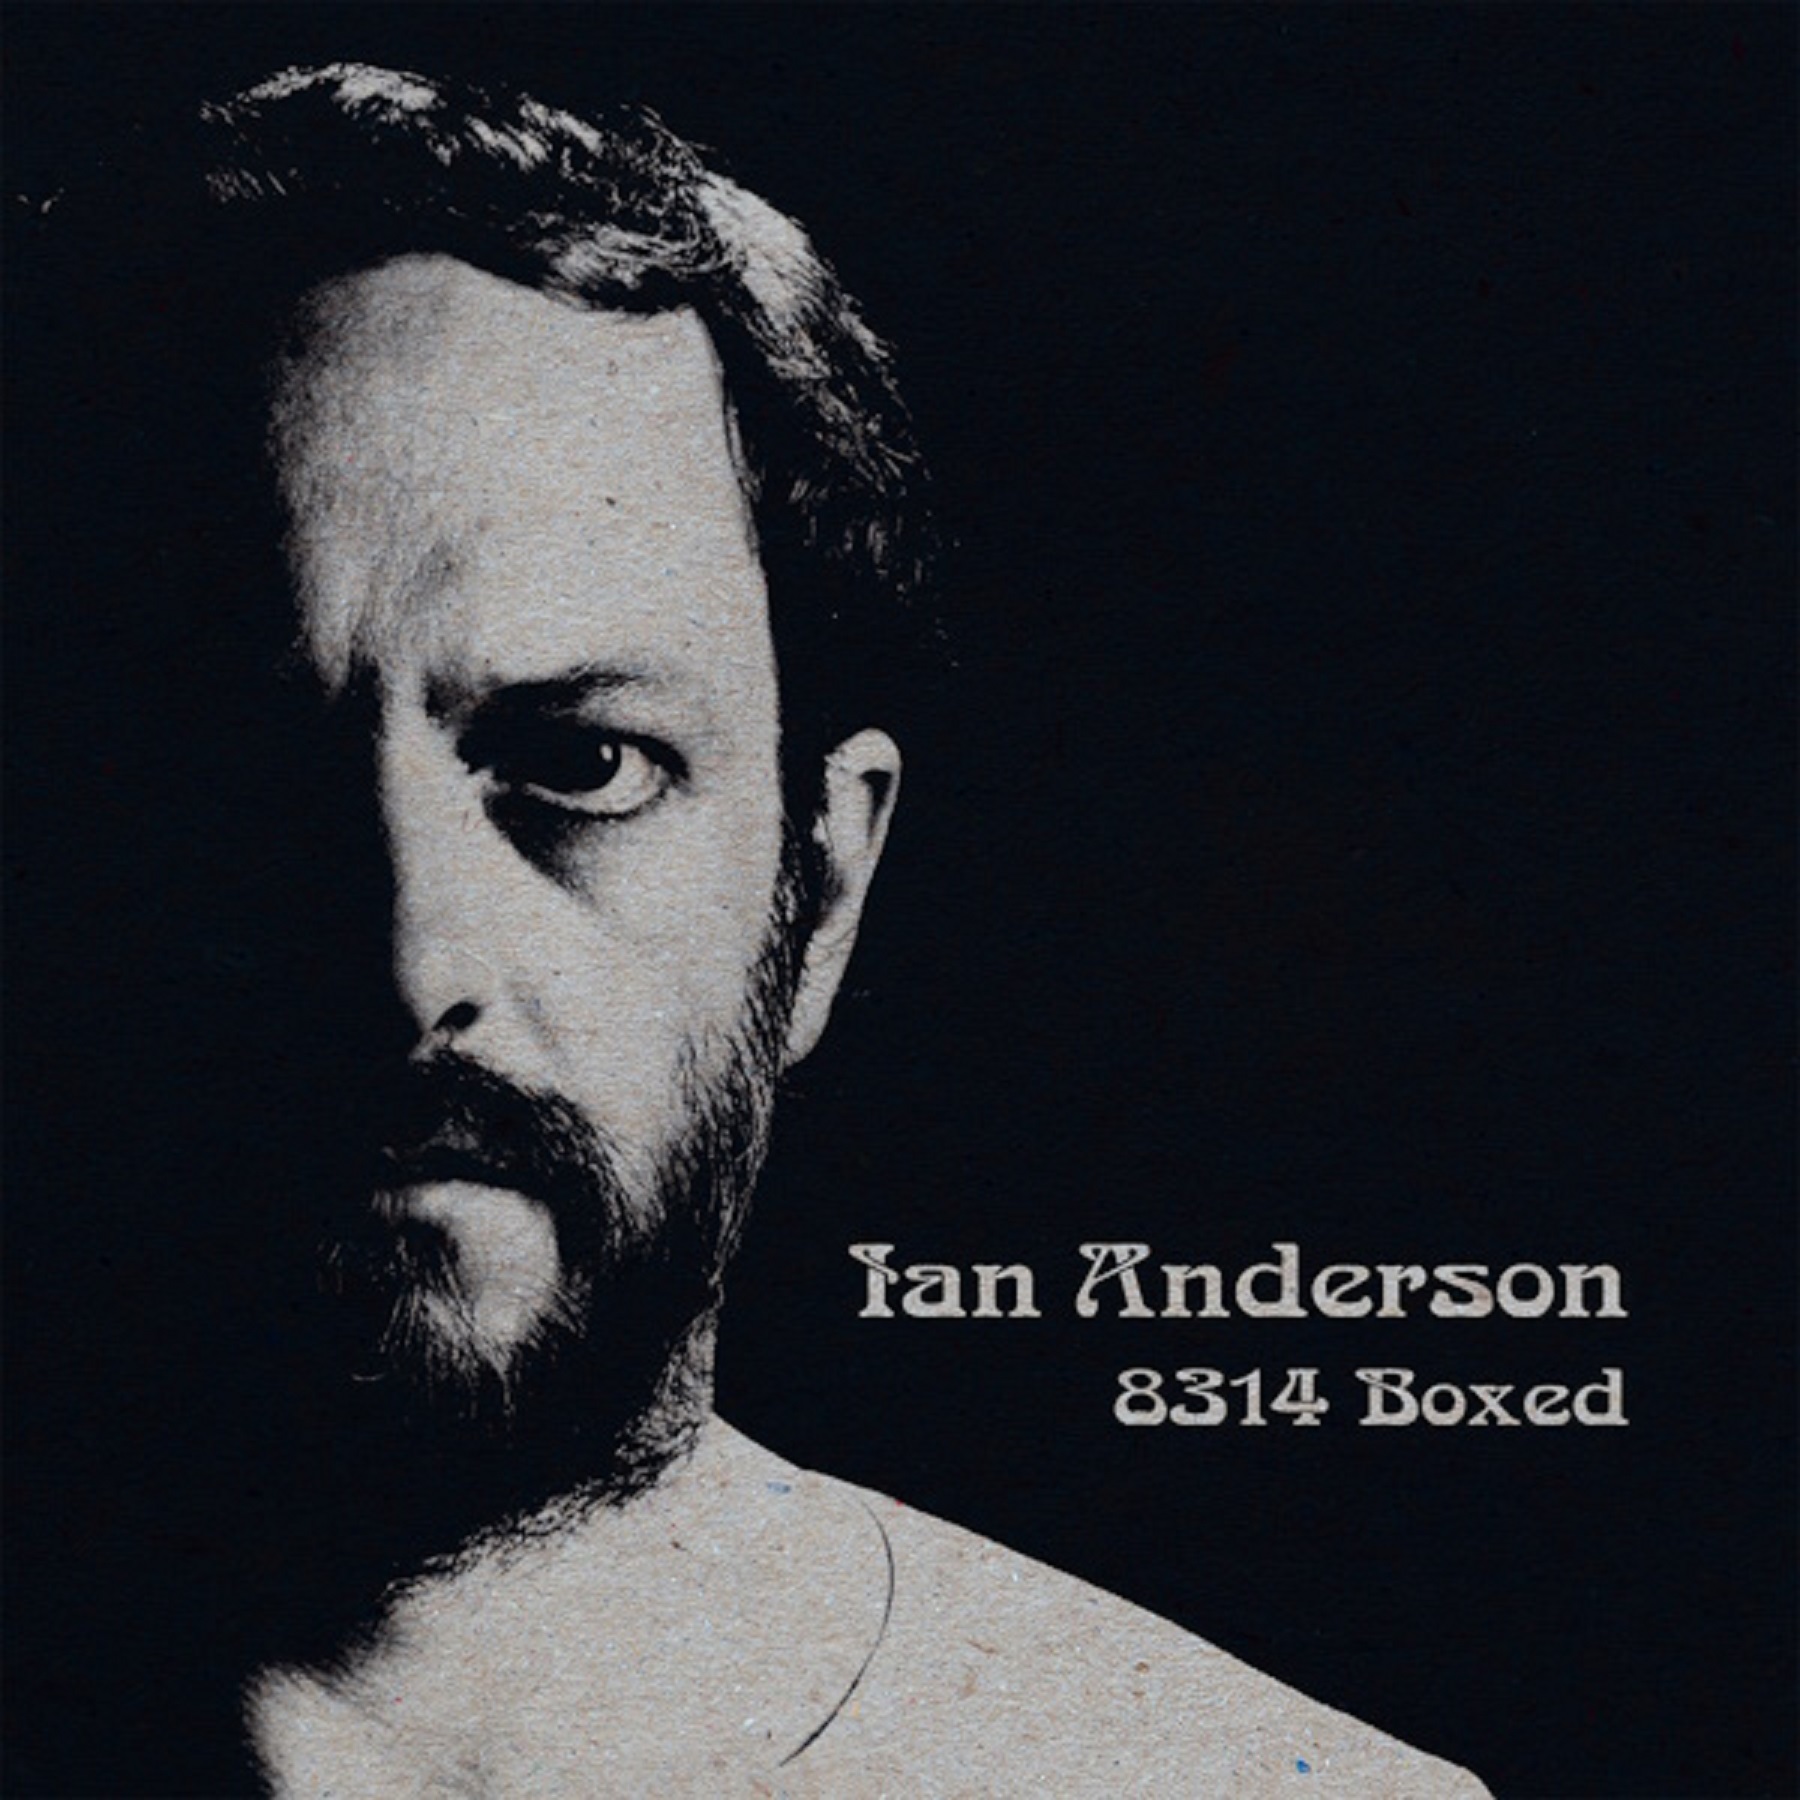 Jethro Tull Frontman Ian Anderson Limited Edition 10LP Limited Box Set “8314 Boxed” Available August 23rd on Madfish Label